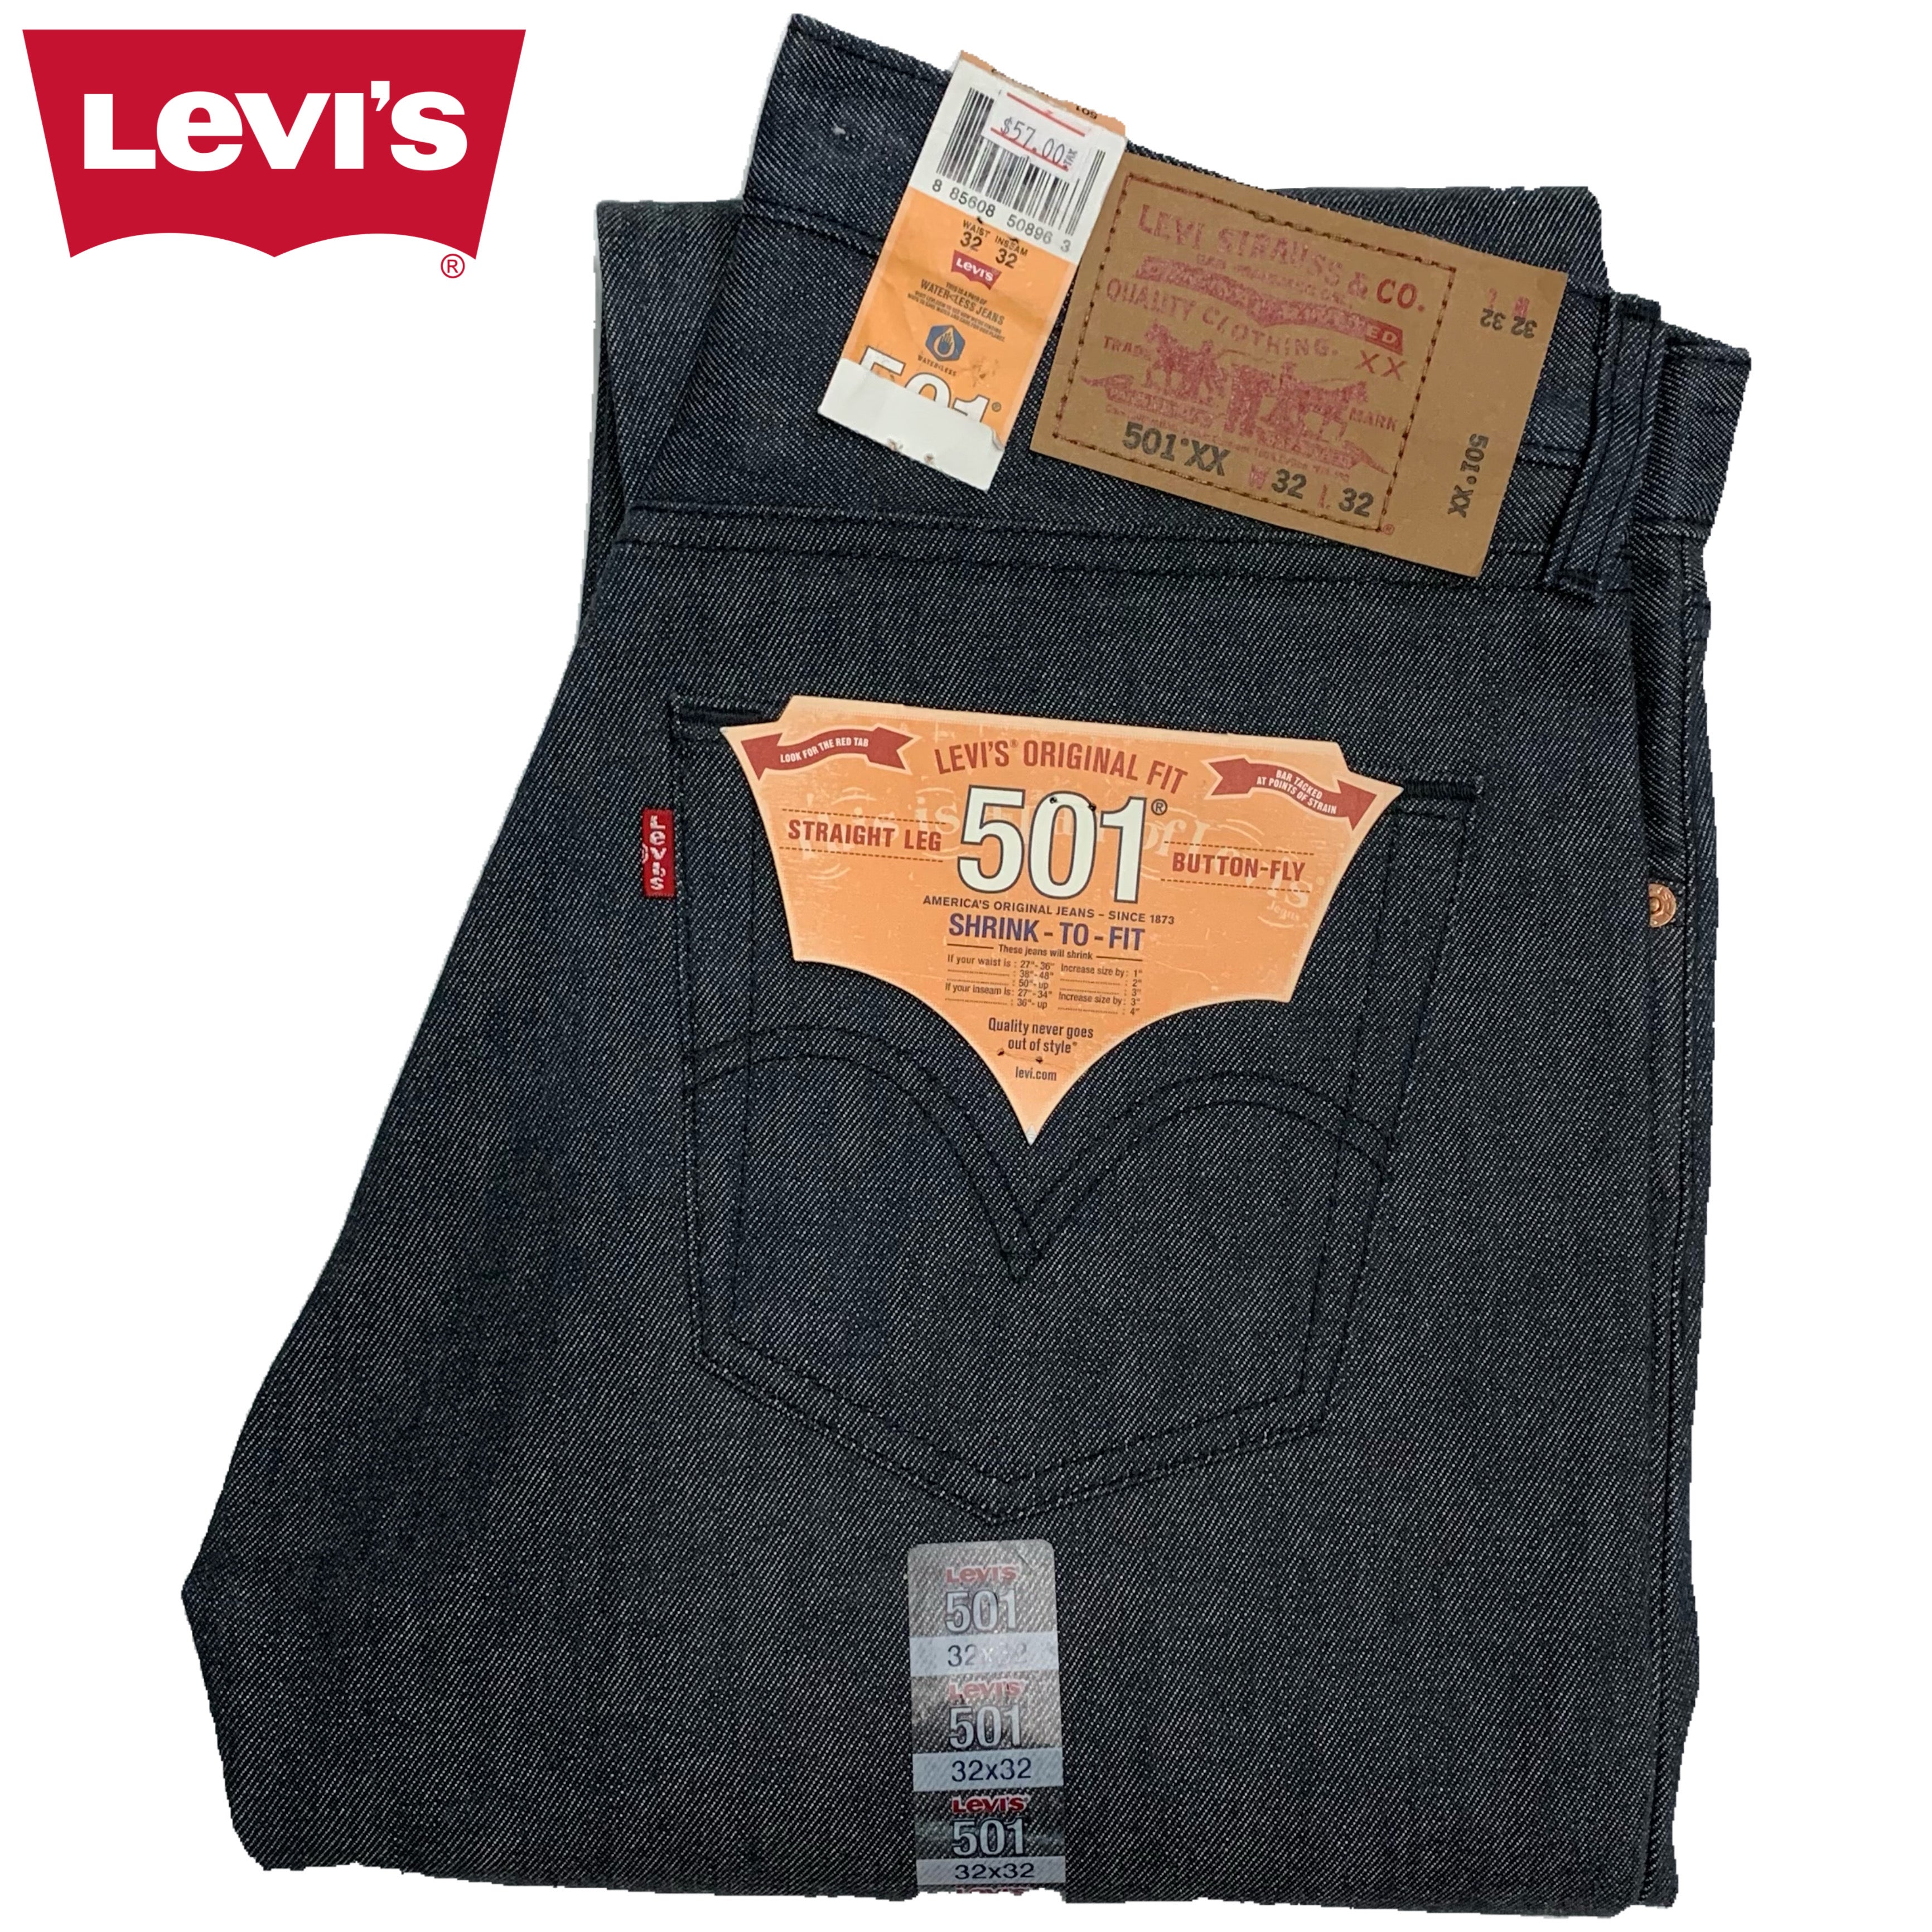 Levi's 501 Shrink-to-Fit - Charcoal Grey - 0987